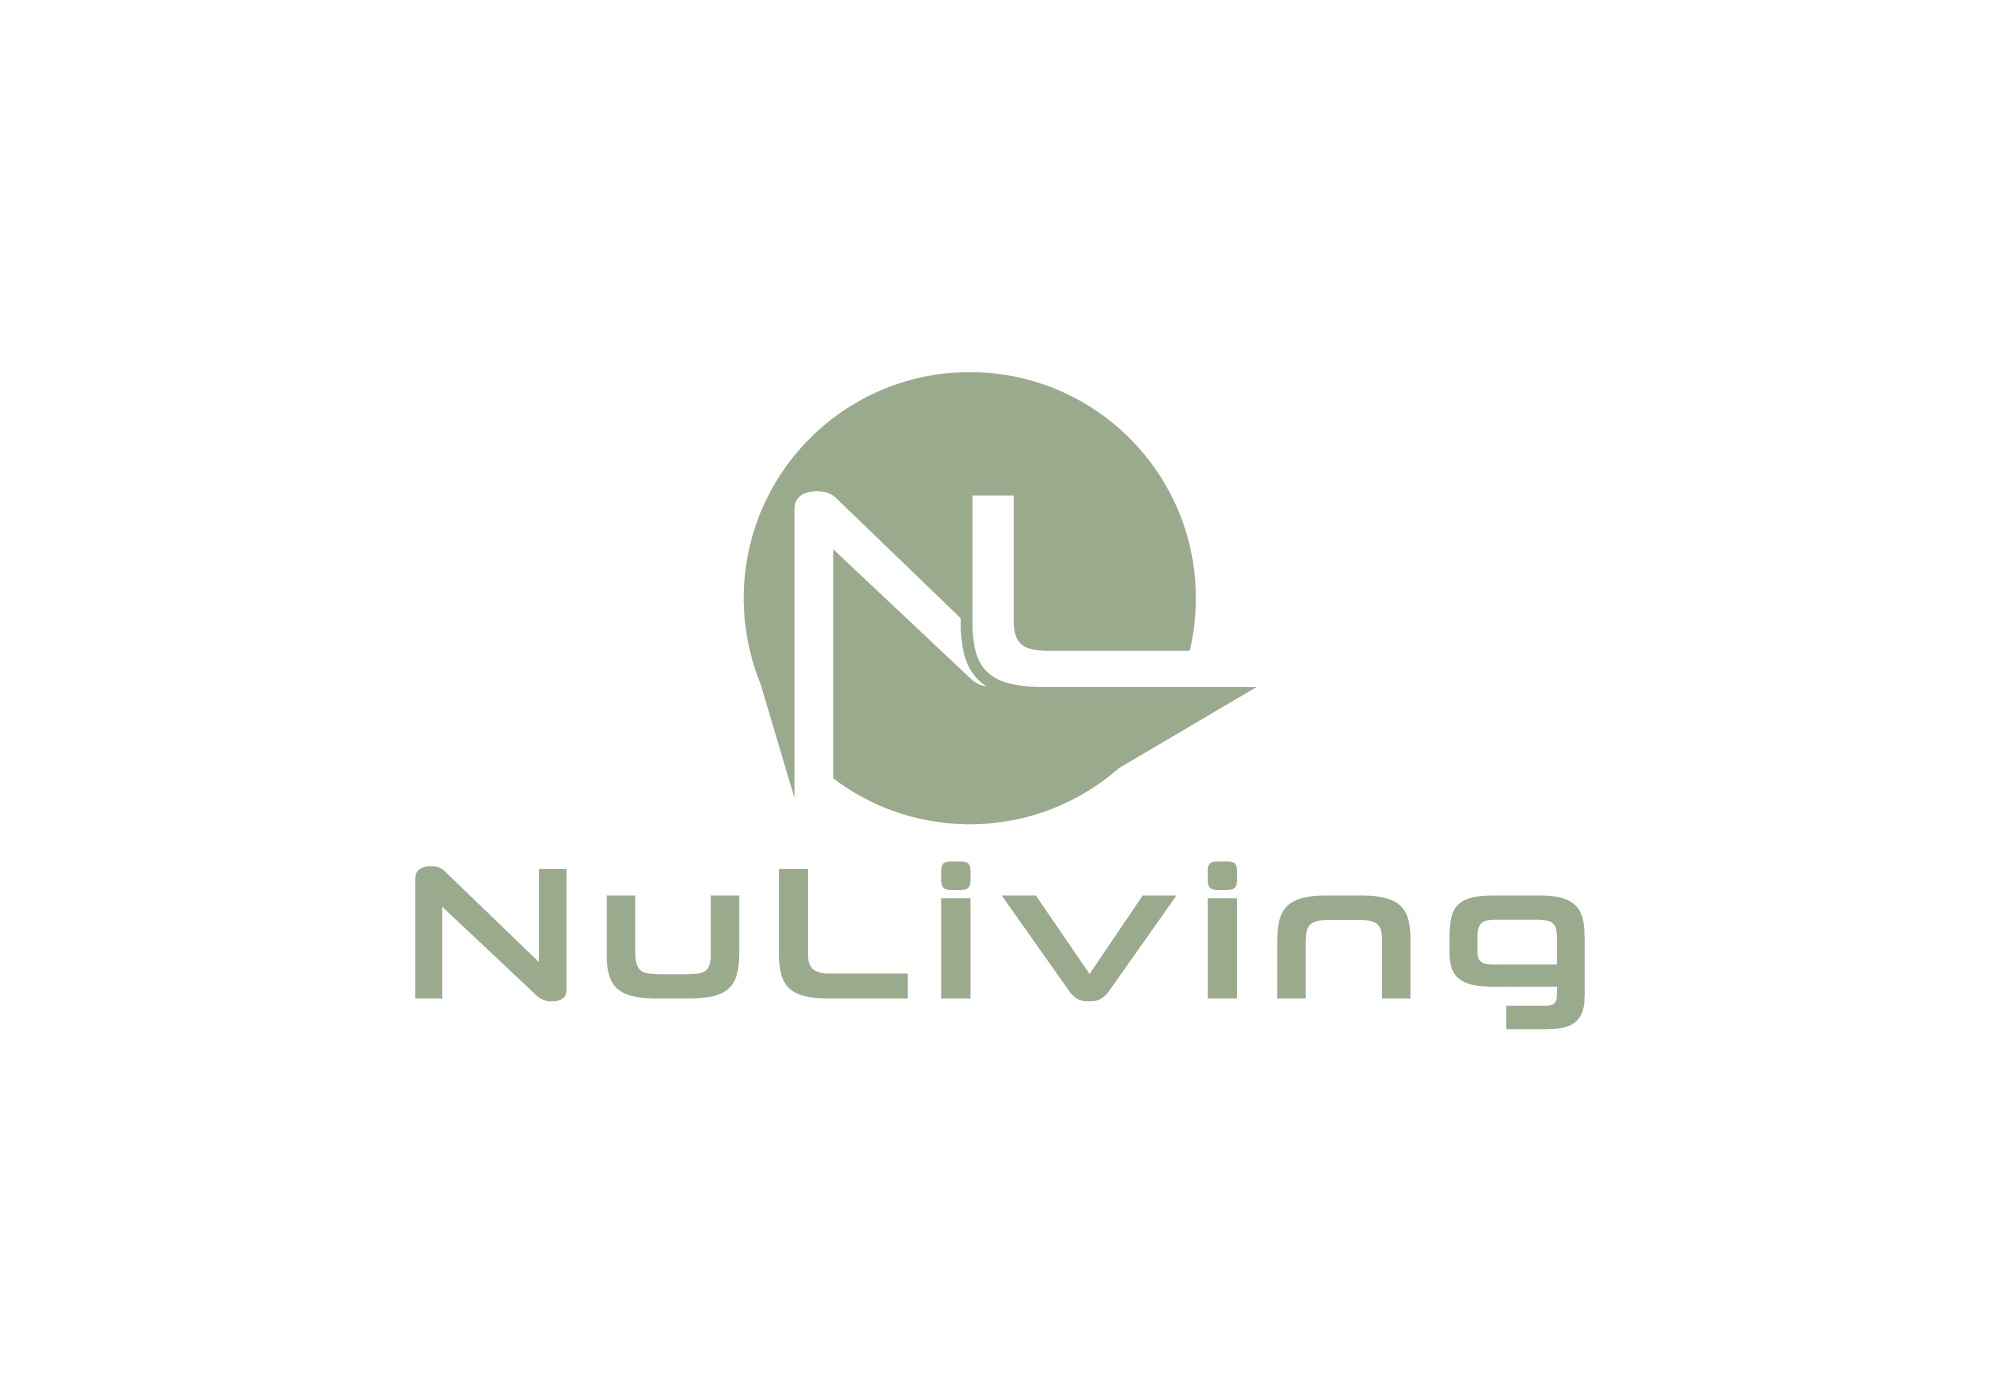 NuLiving